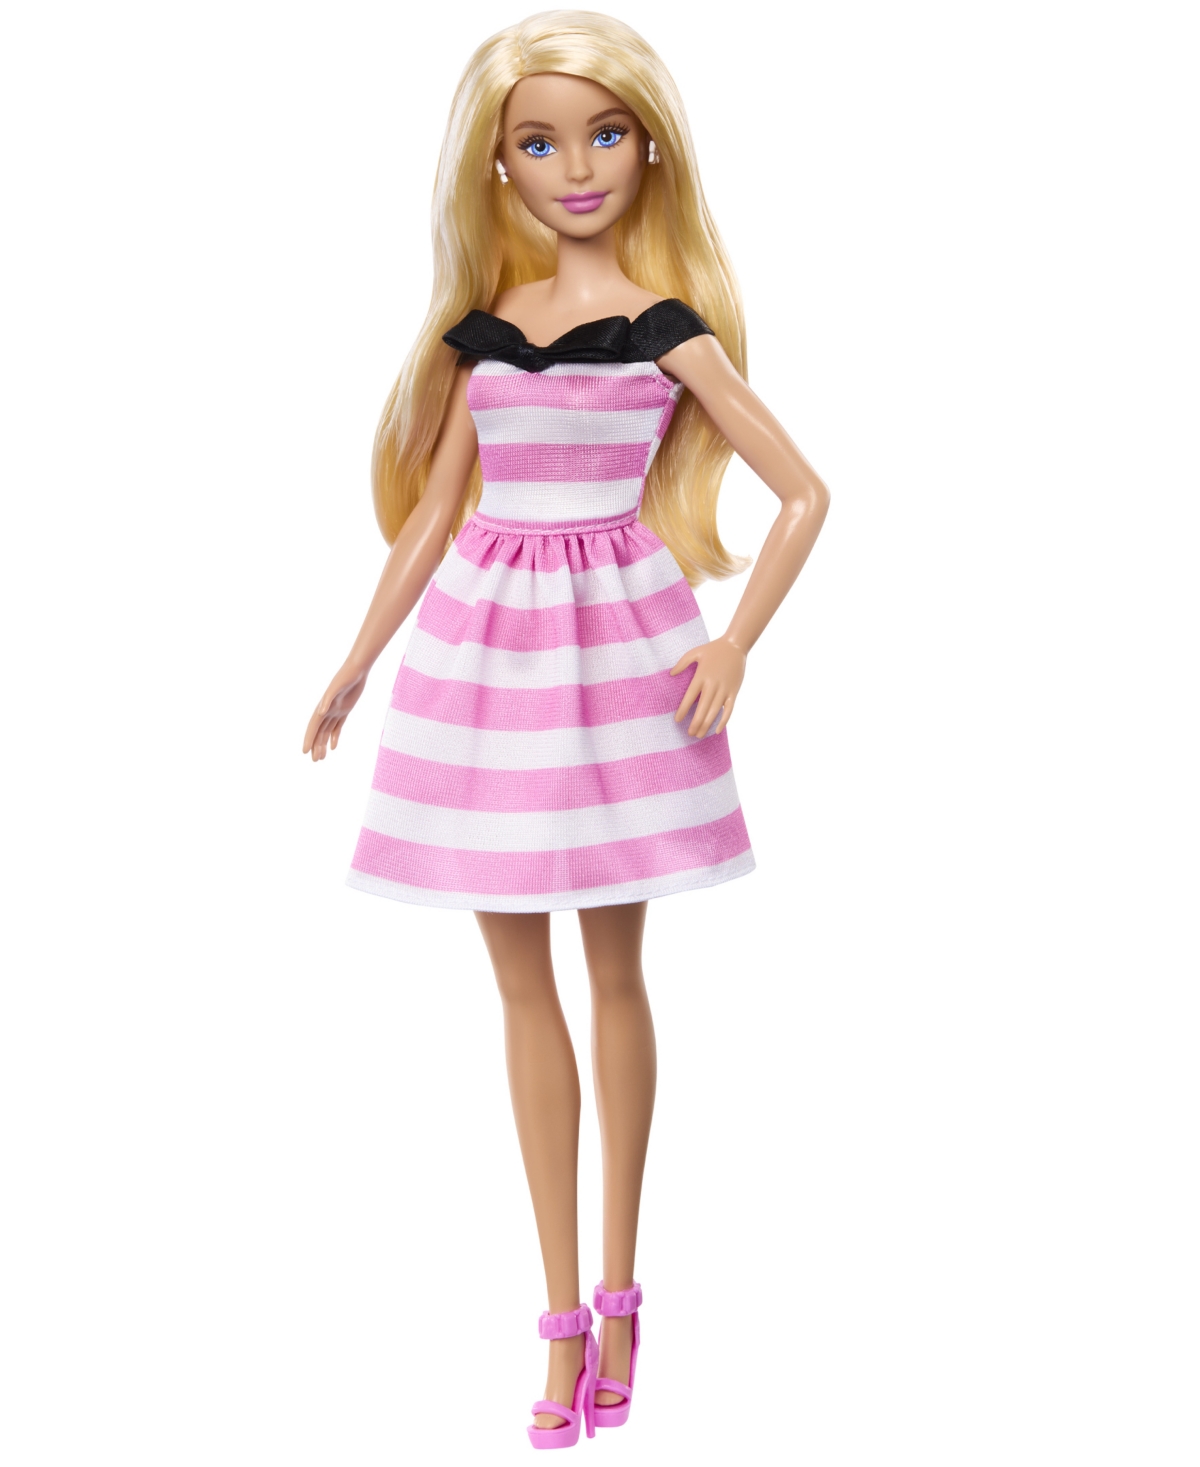 Shop Barbie 65th Anniversary Fashion Doll With Blonde Hair, Pink Striped Dress And Accessories In Multi